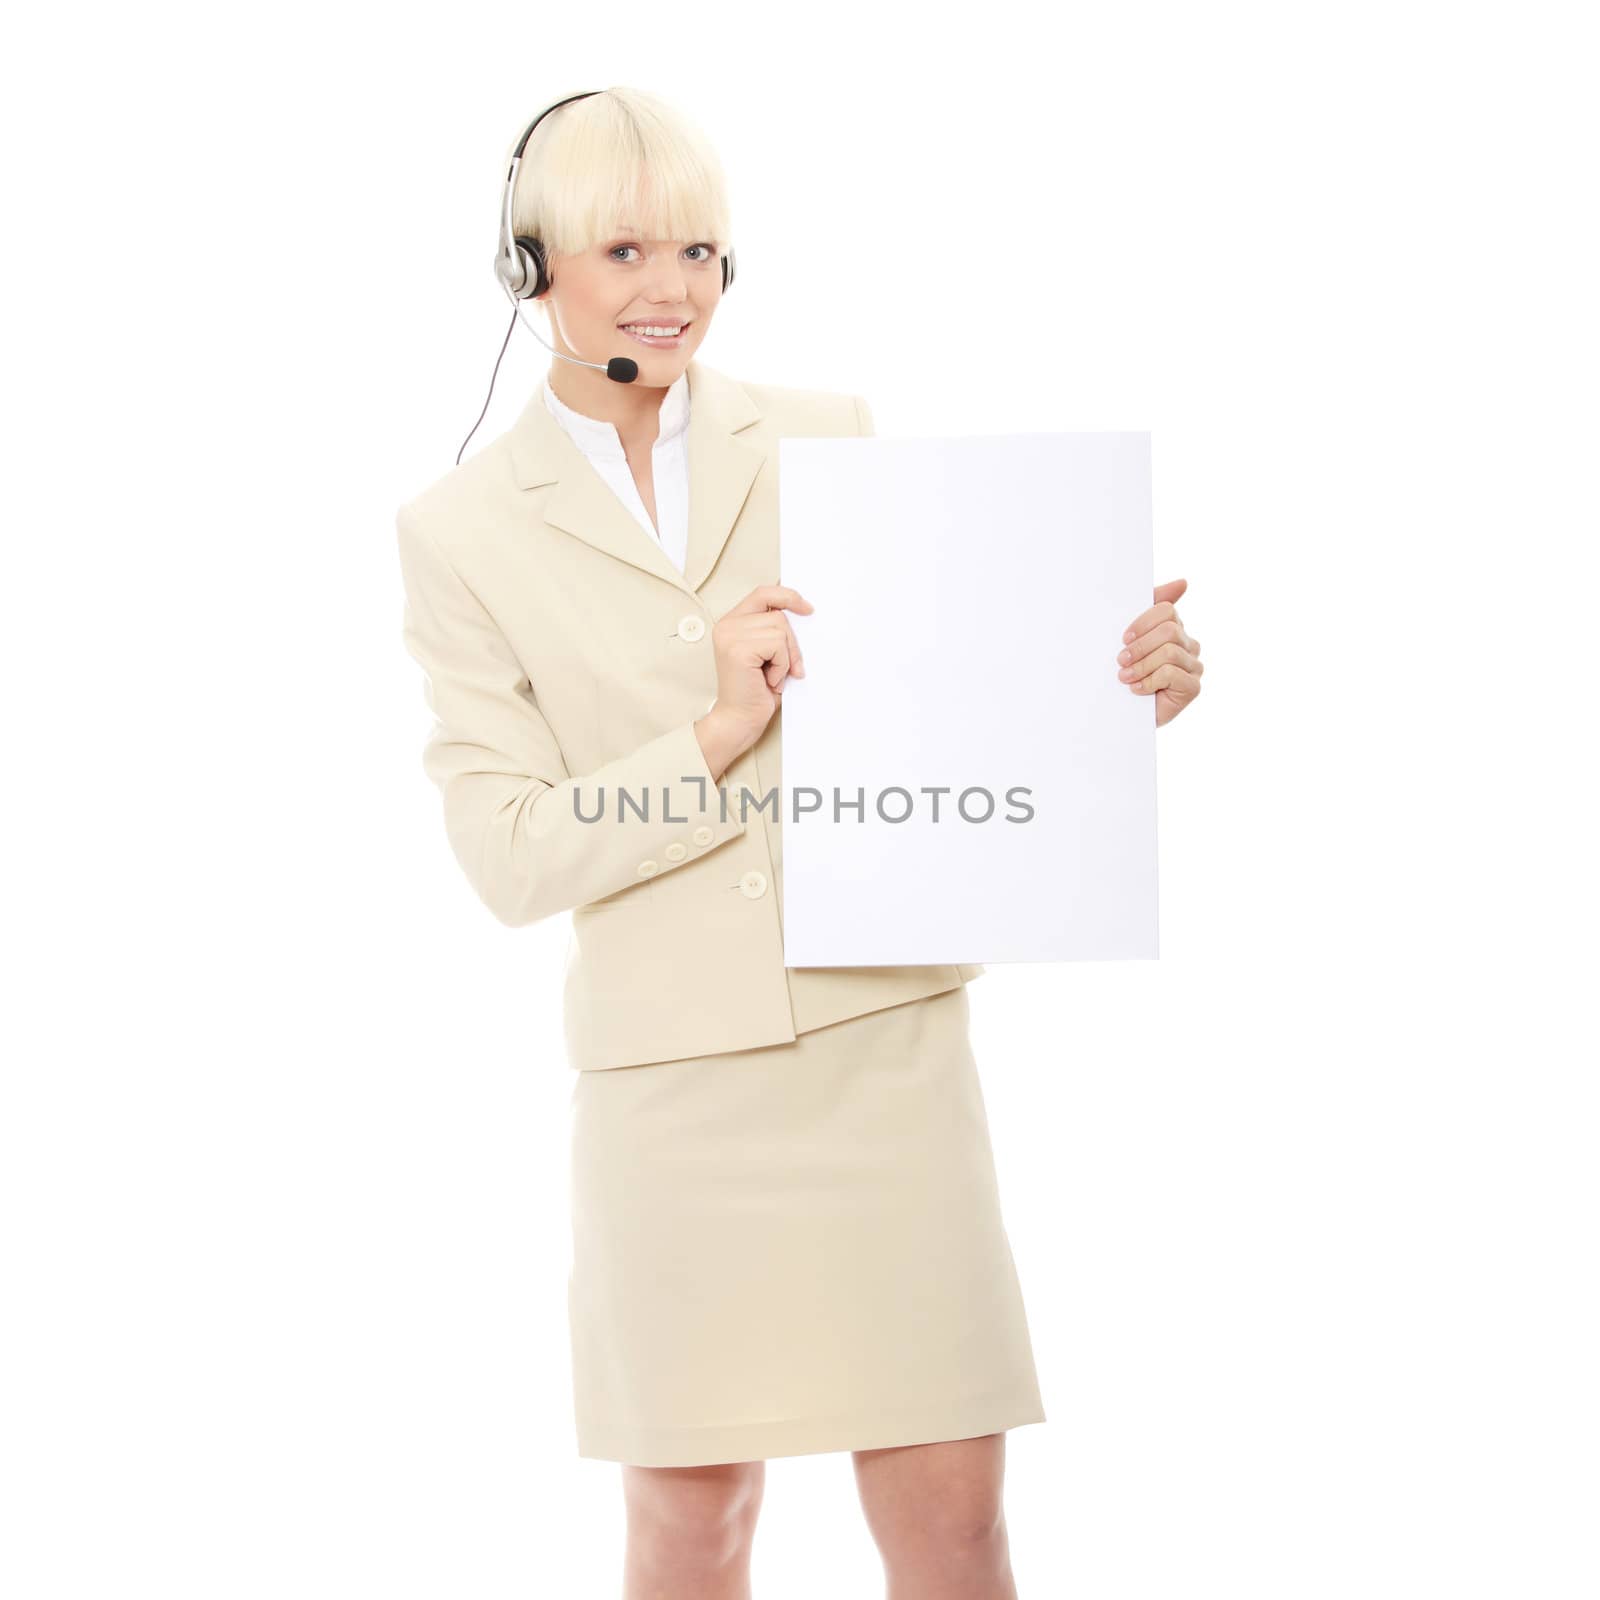 Call center woman with headset holding blank sign. Isolated on white background.